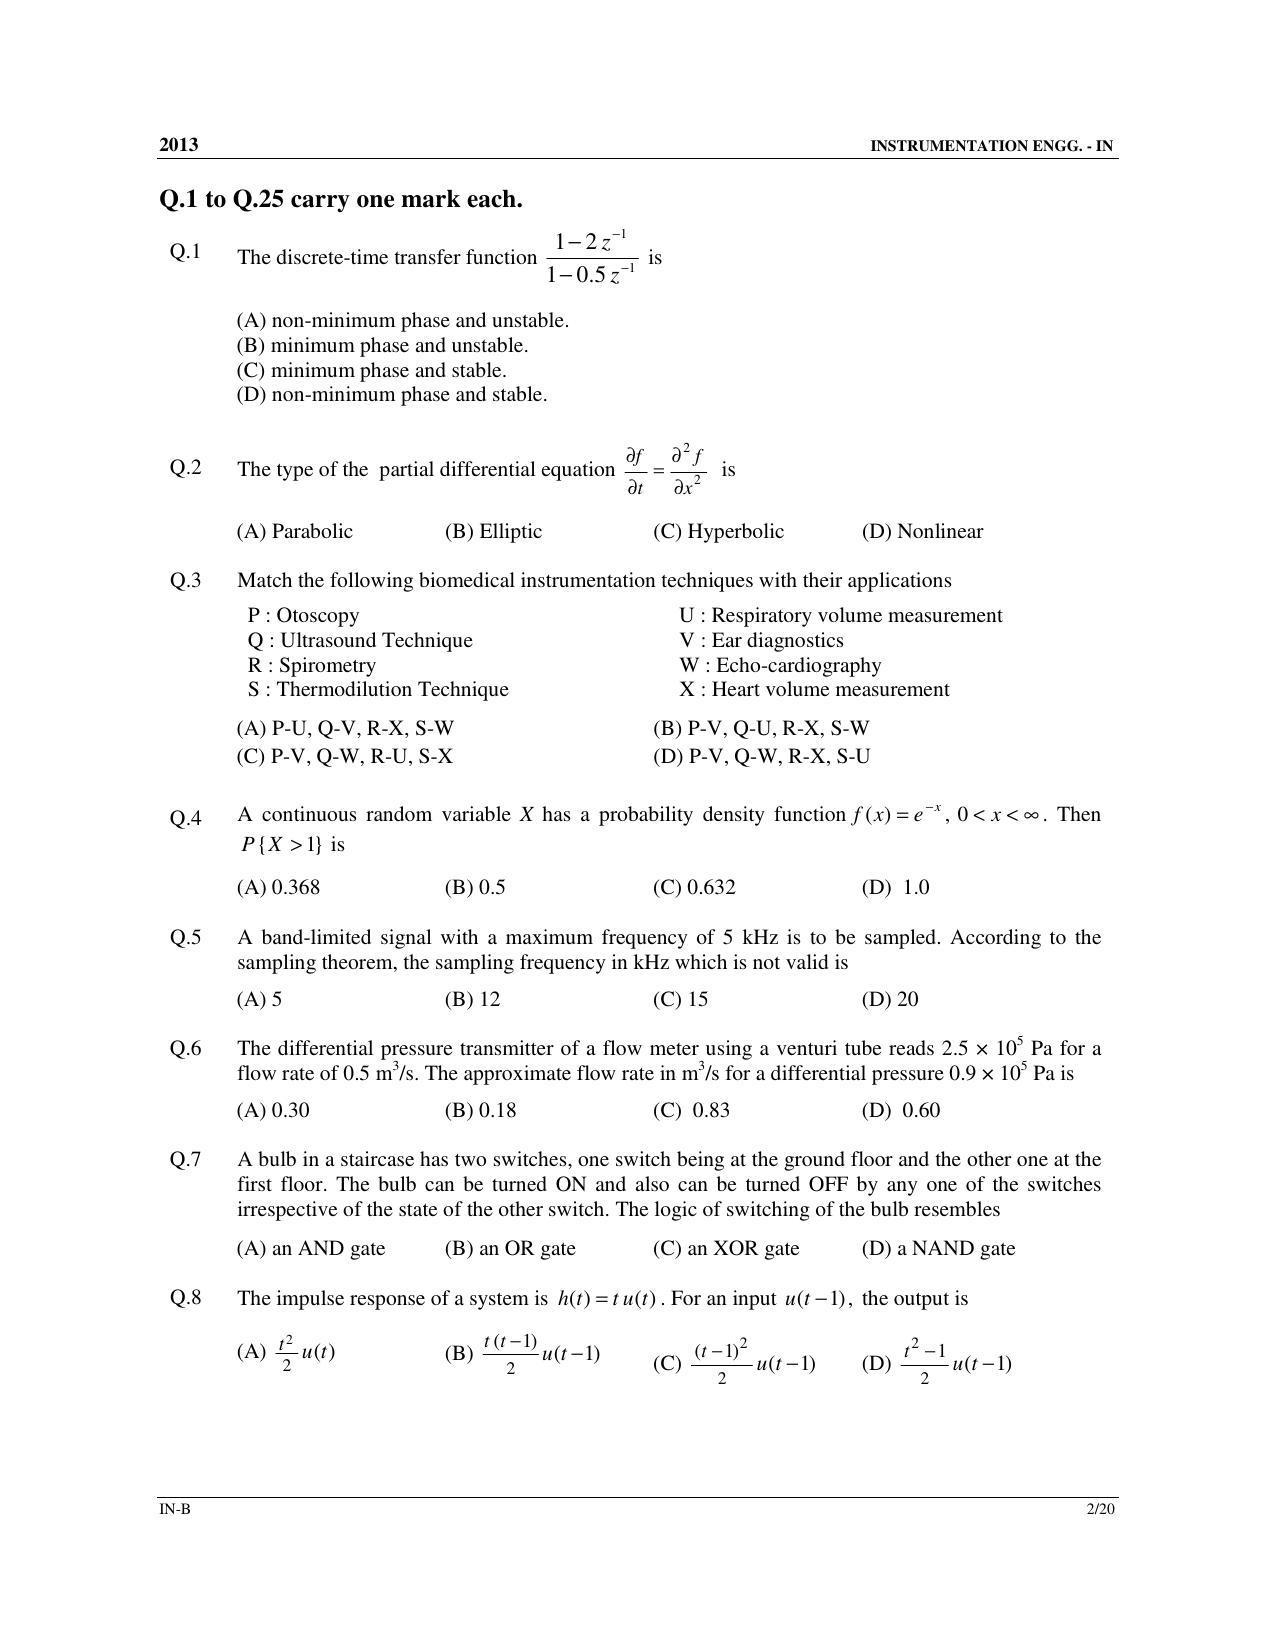 GATE 2013 Instrumentation Engineering (IN) Question Paper with Answer Key - Page 20